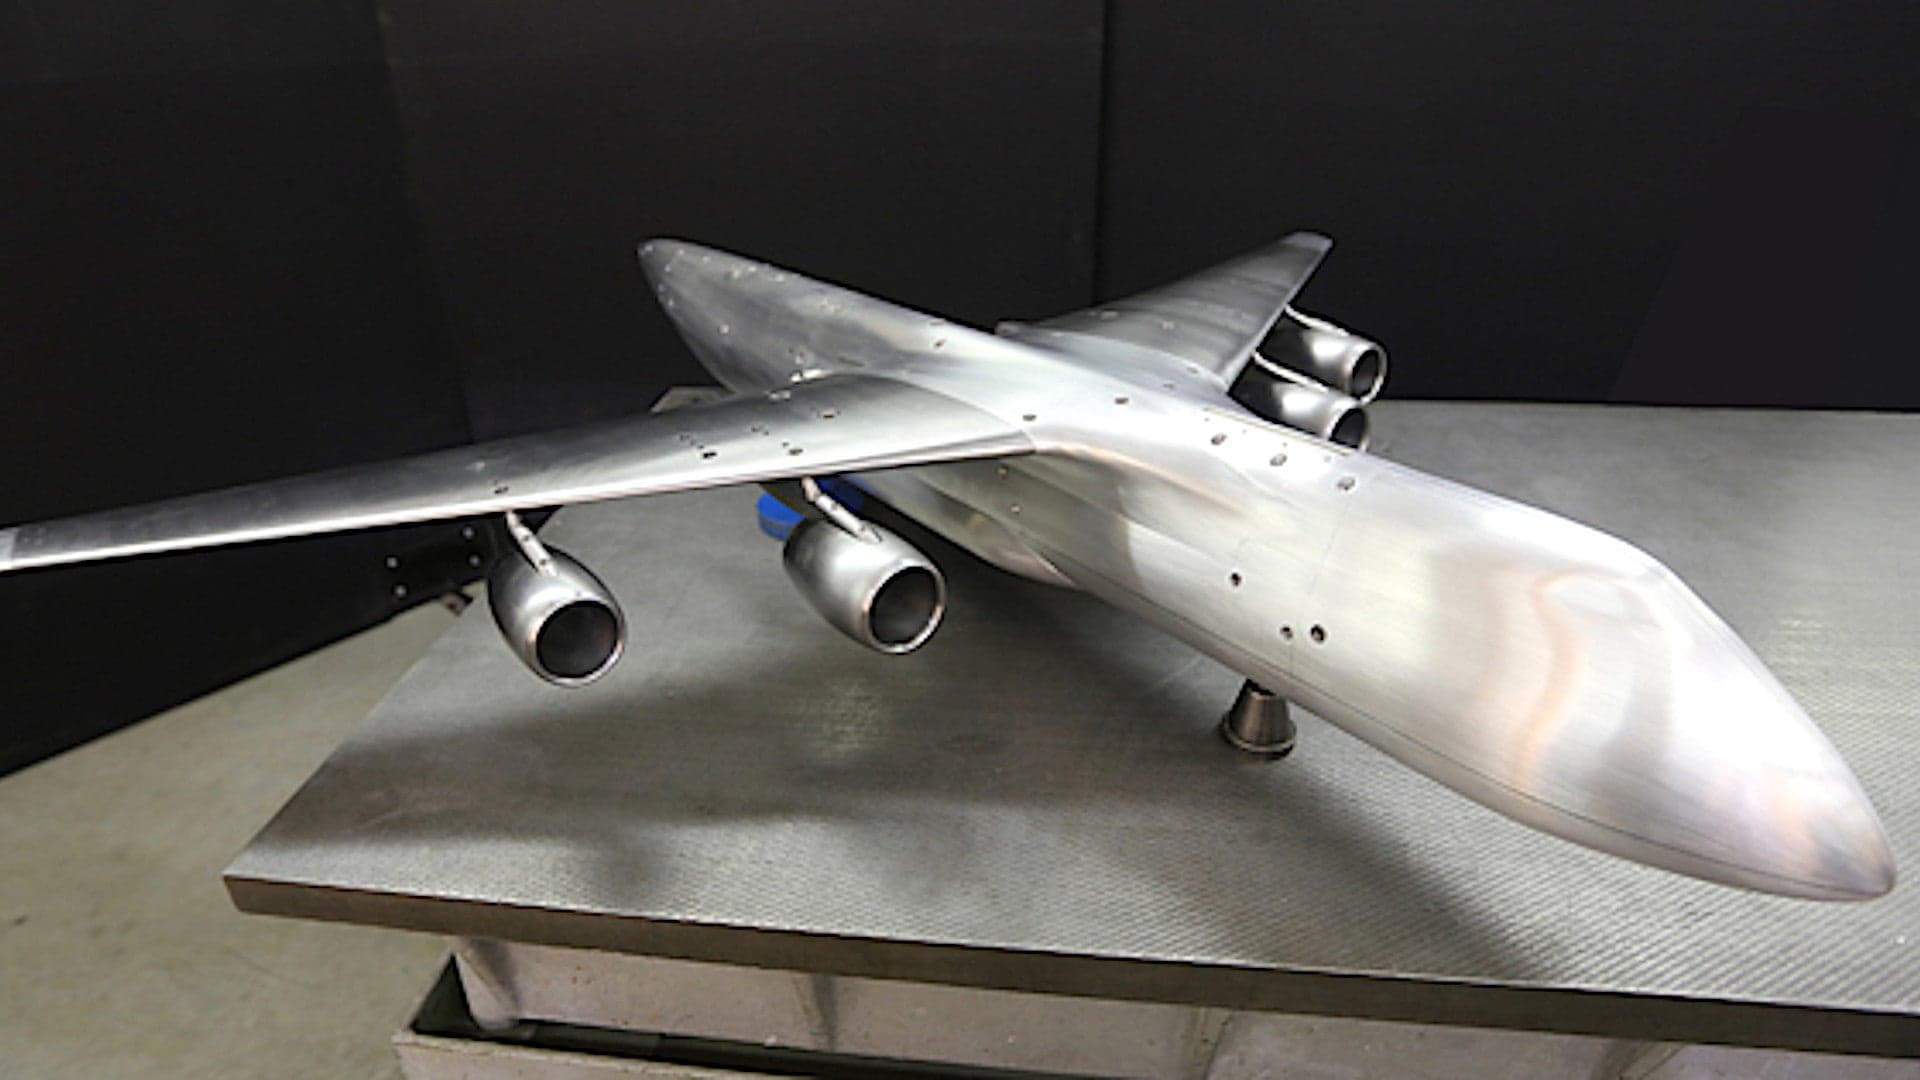 Russia Shows Wind Tunnel Model Of An “Elephant” Airlifter Replacement For The An-124